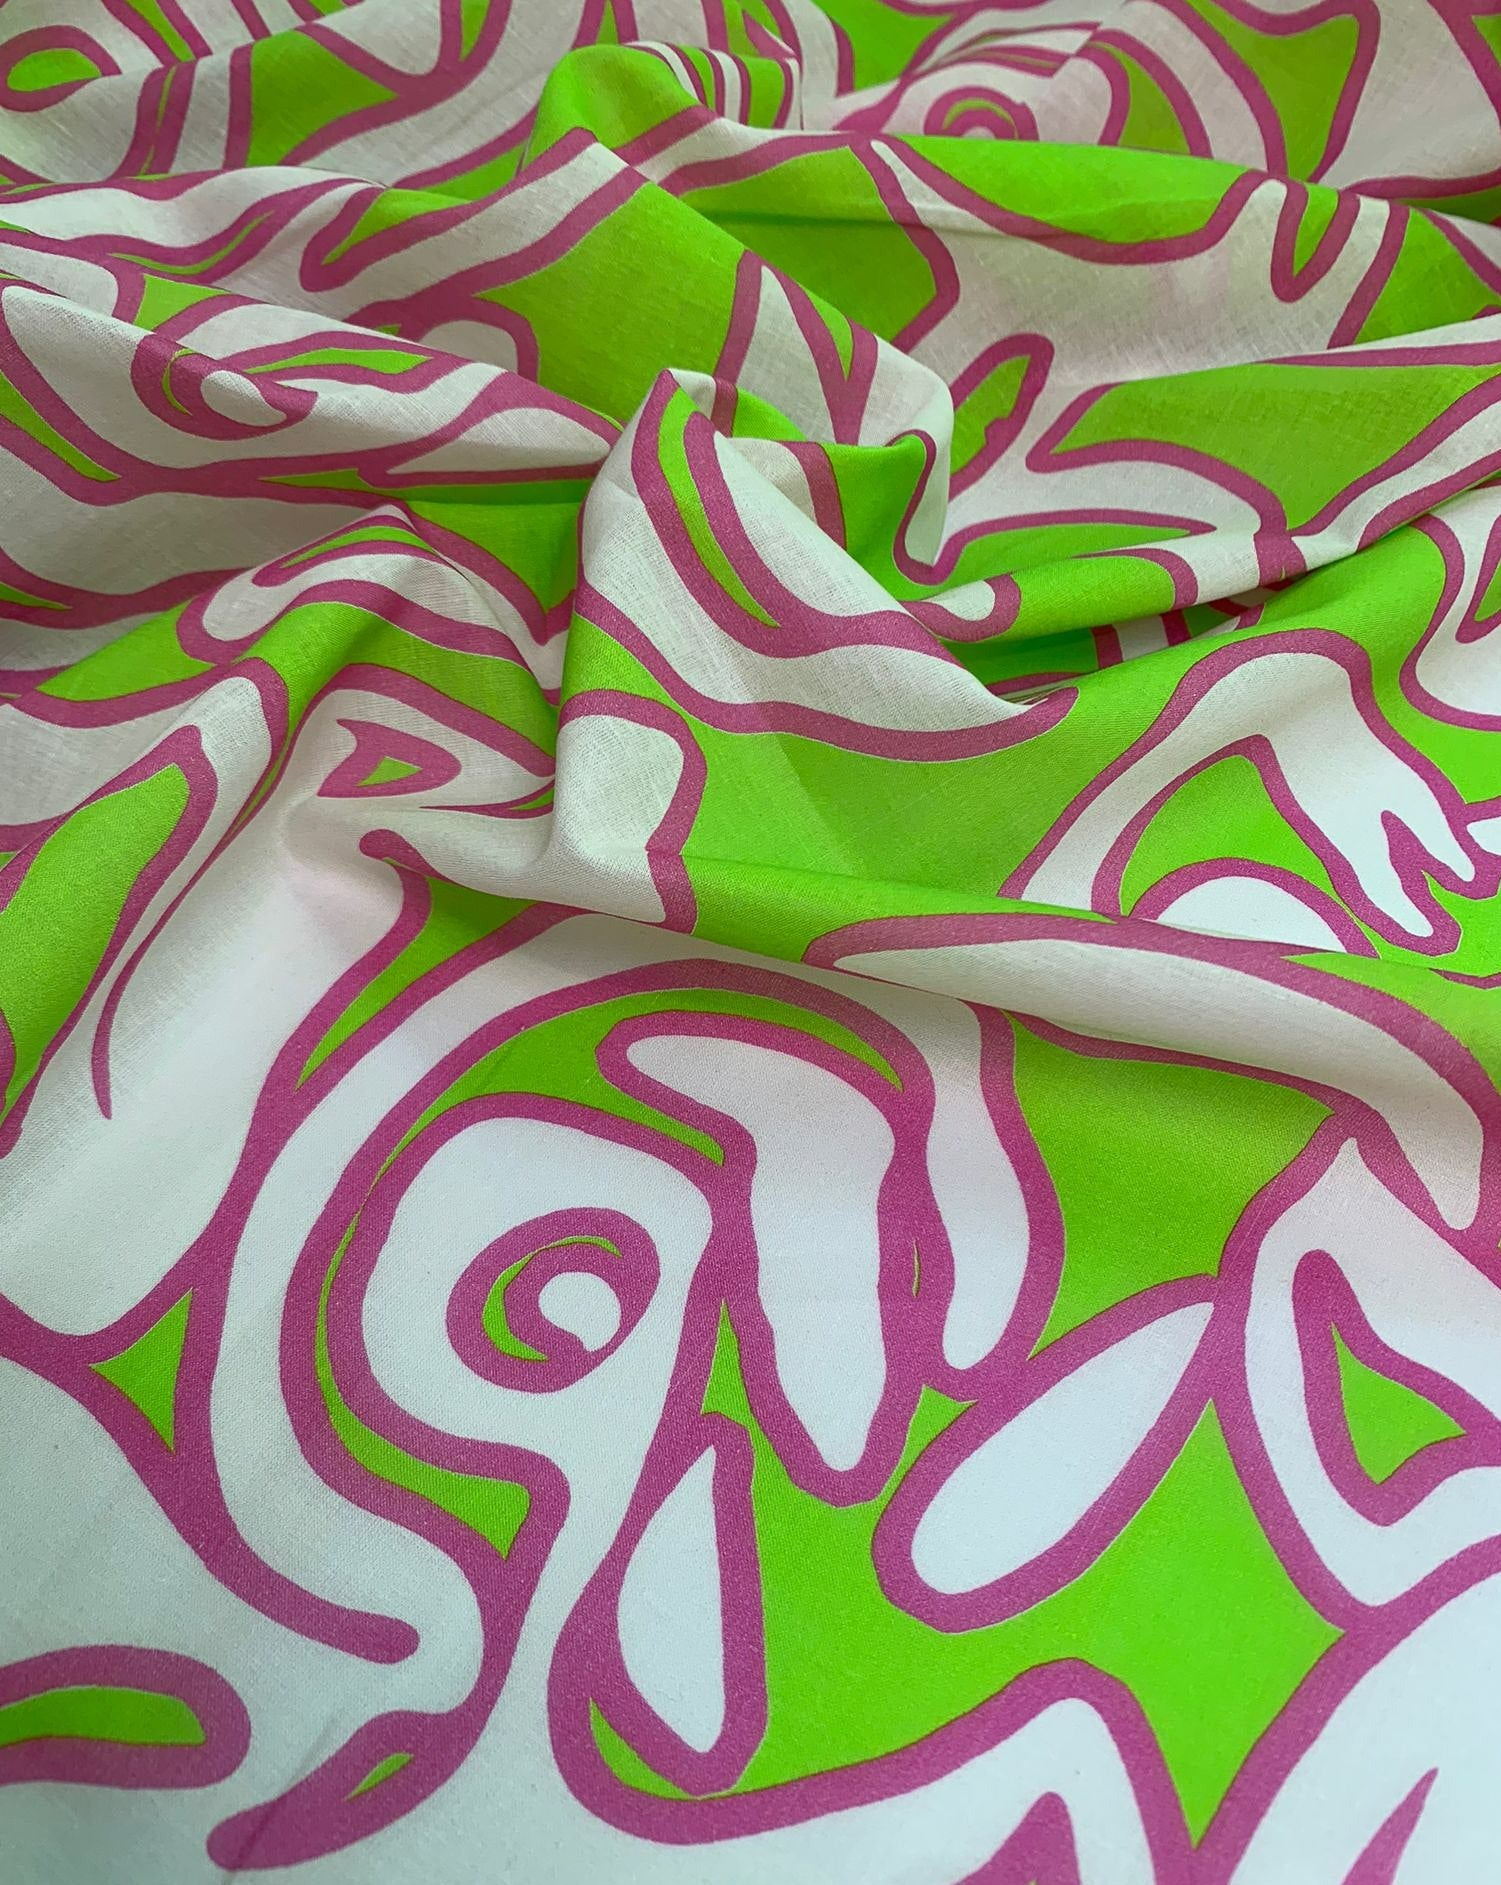 No. 845 B-stock cotton with abstract pattern green pink